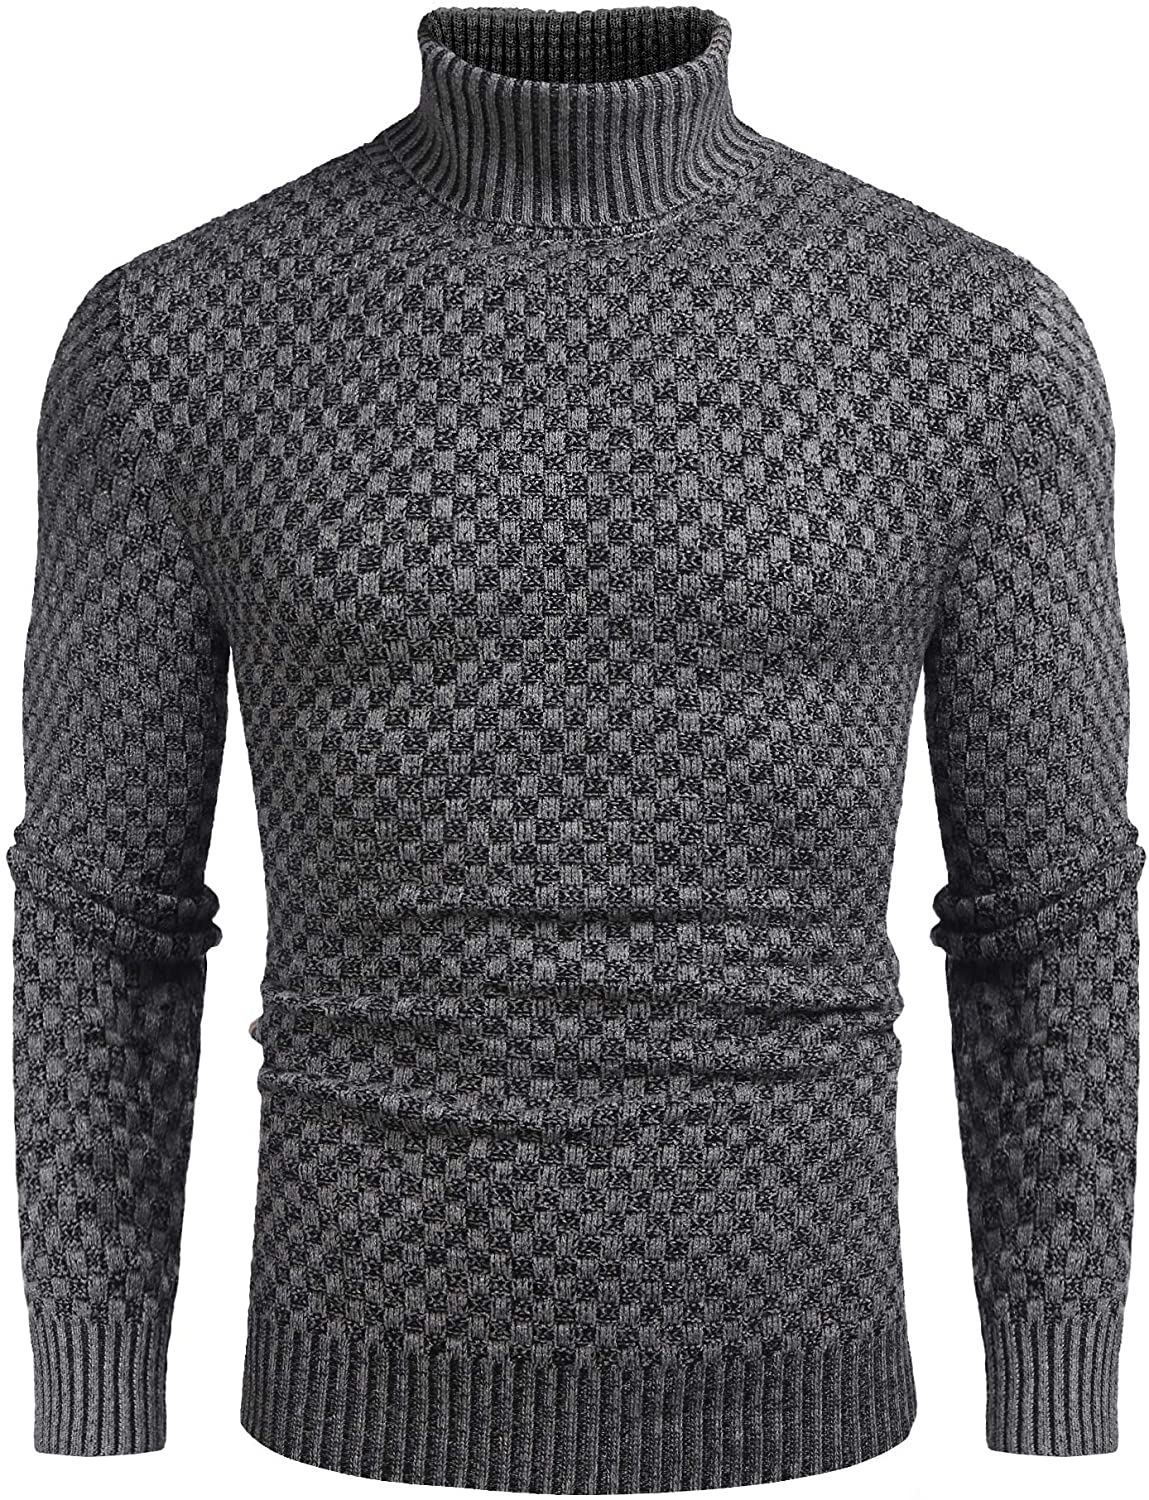 COOFANDY Men's Basic Ribbed Thermal Knitted Pullover Slim Fit ...